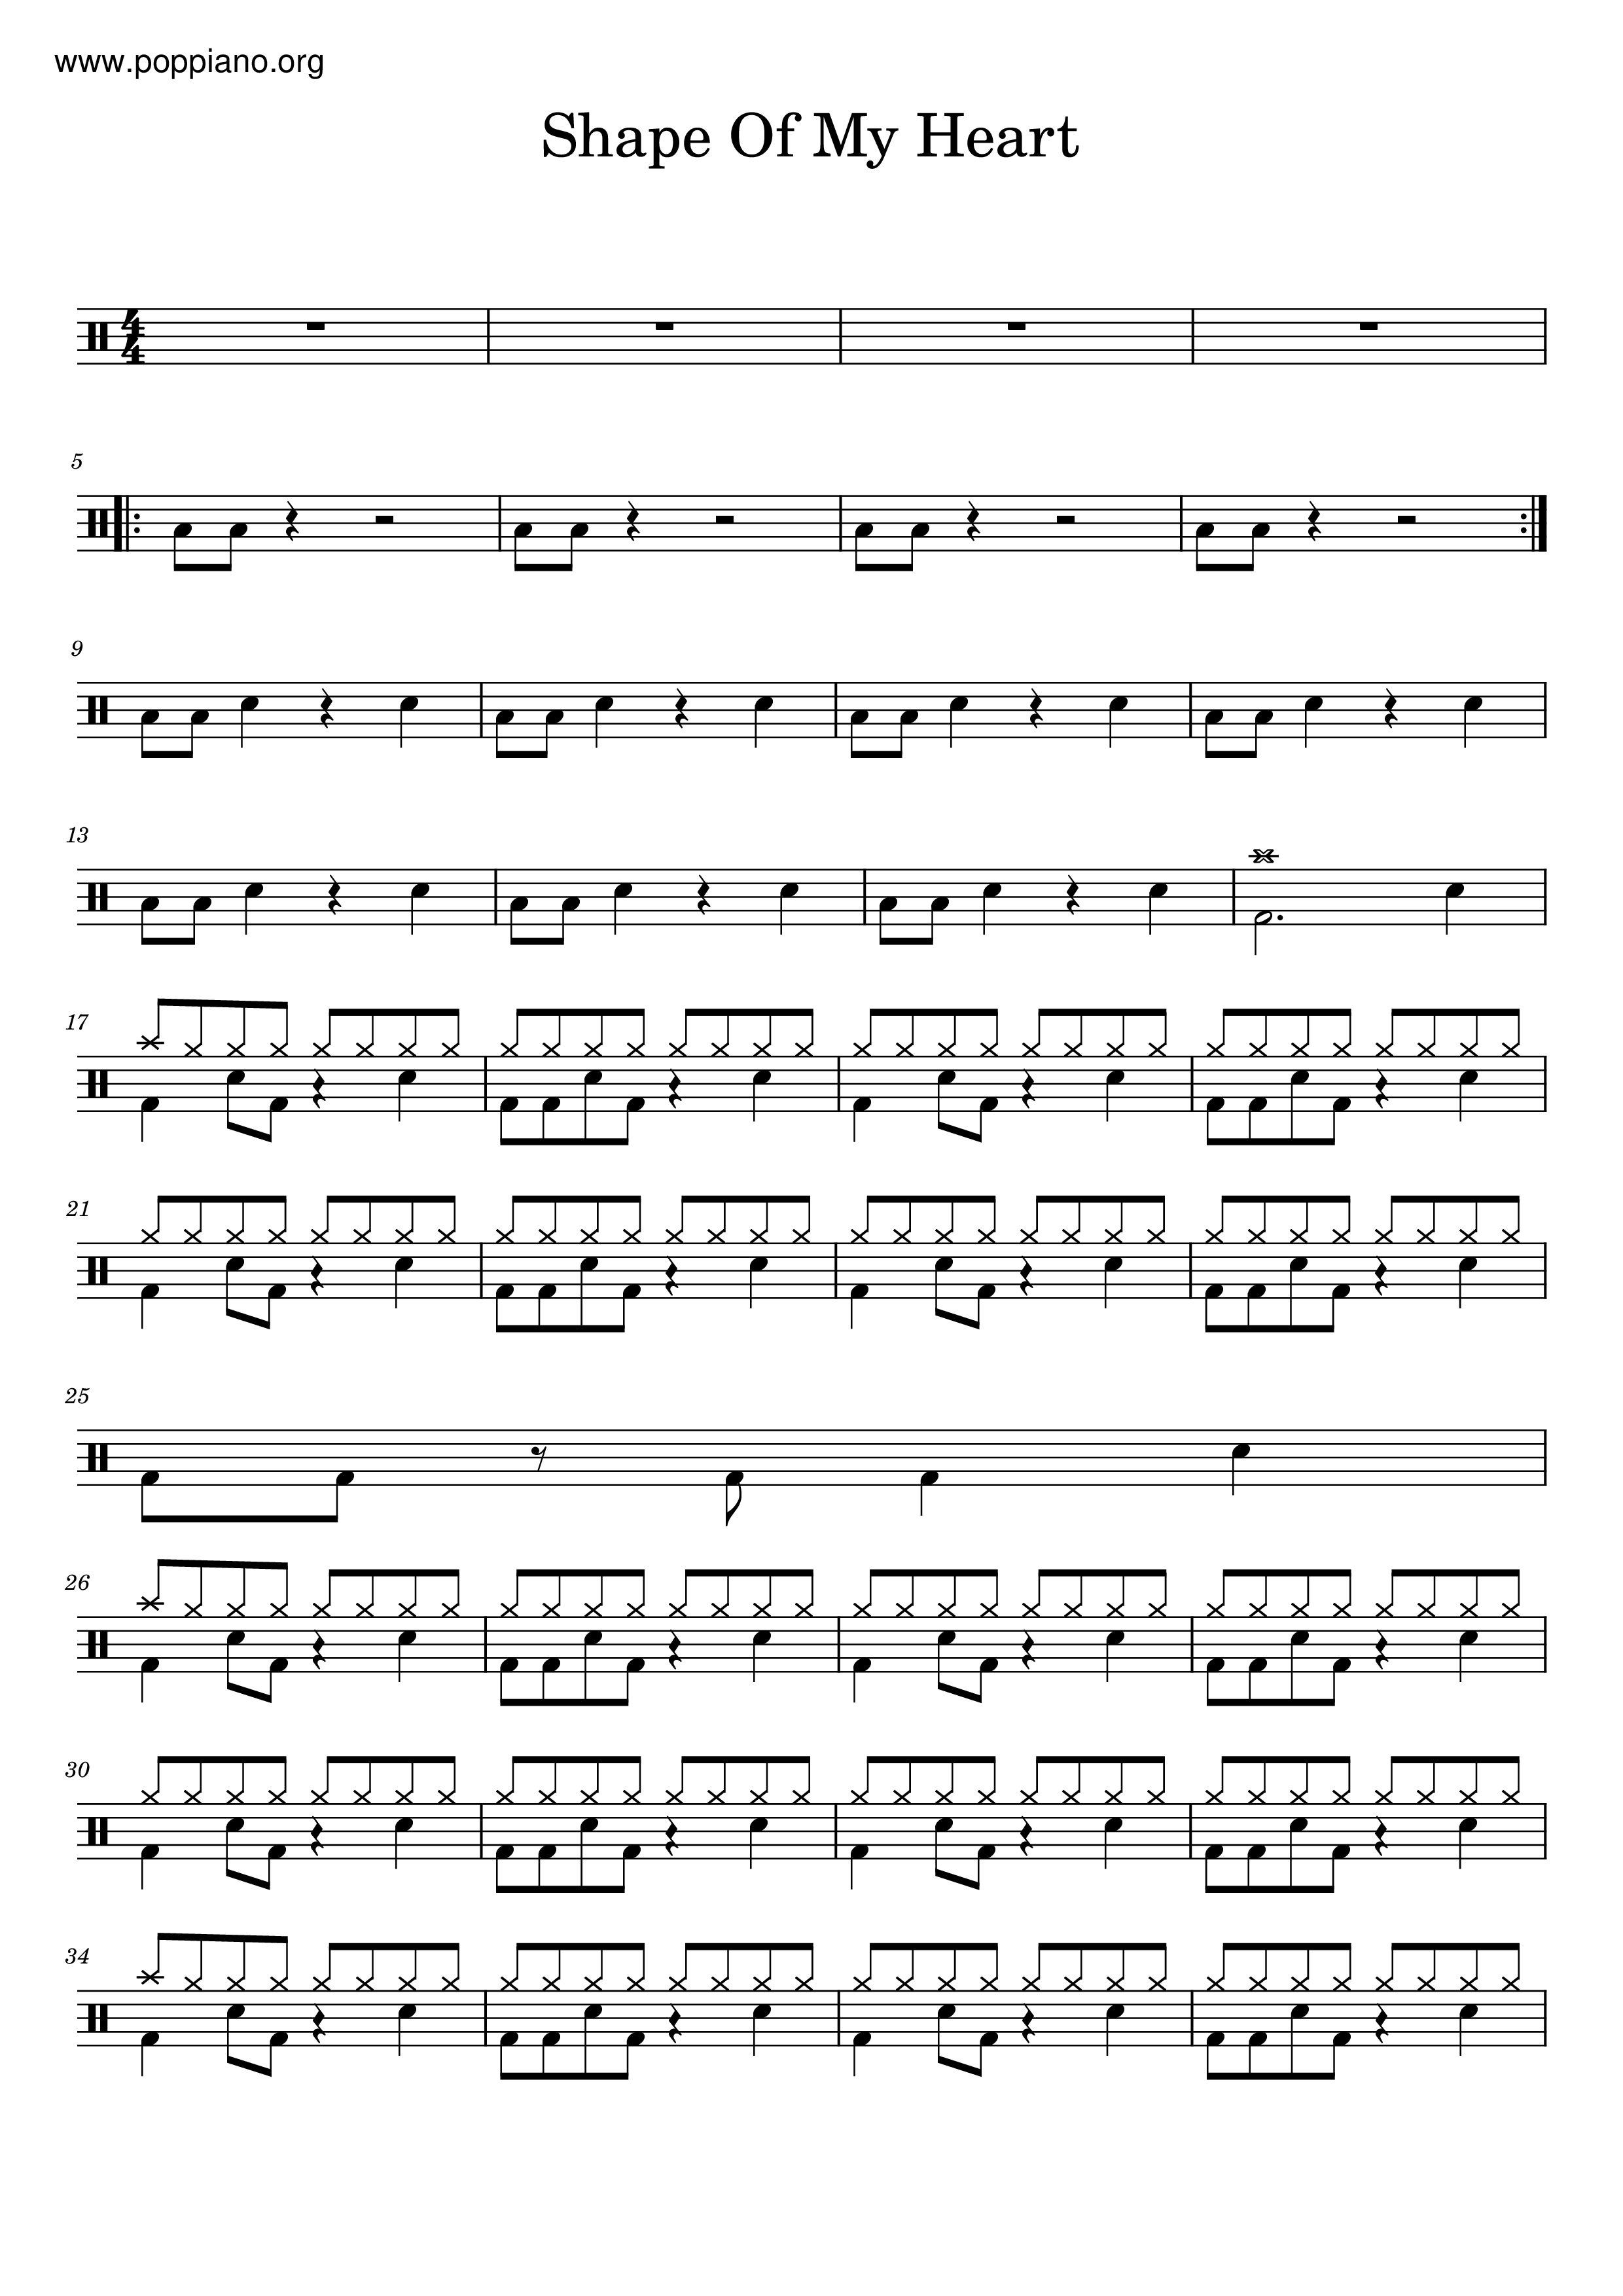 Quit Playing Games With My Heart free sheet music by Backstreet Boys